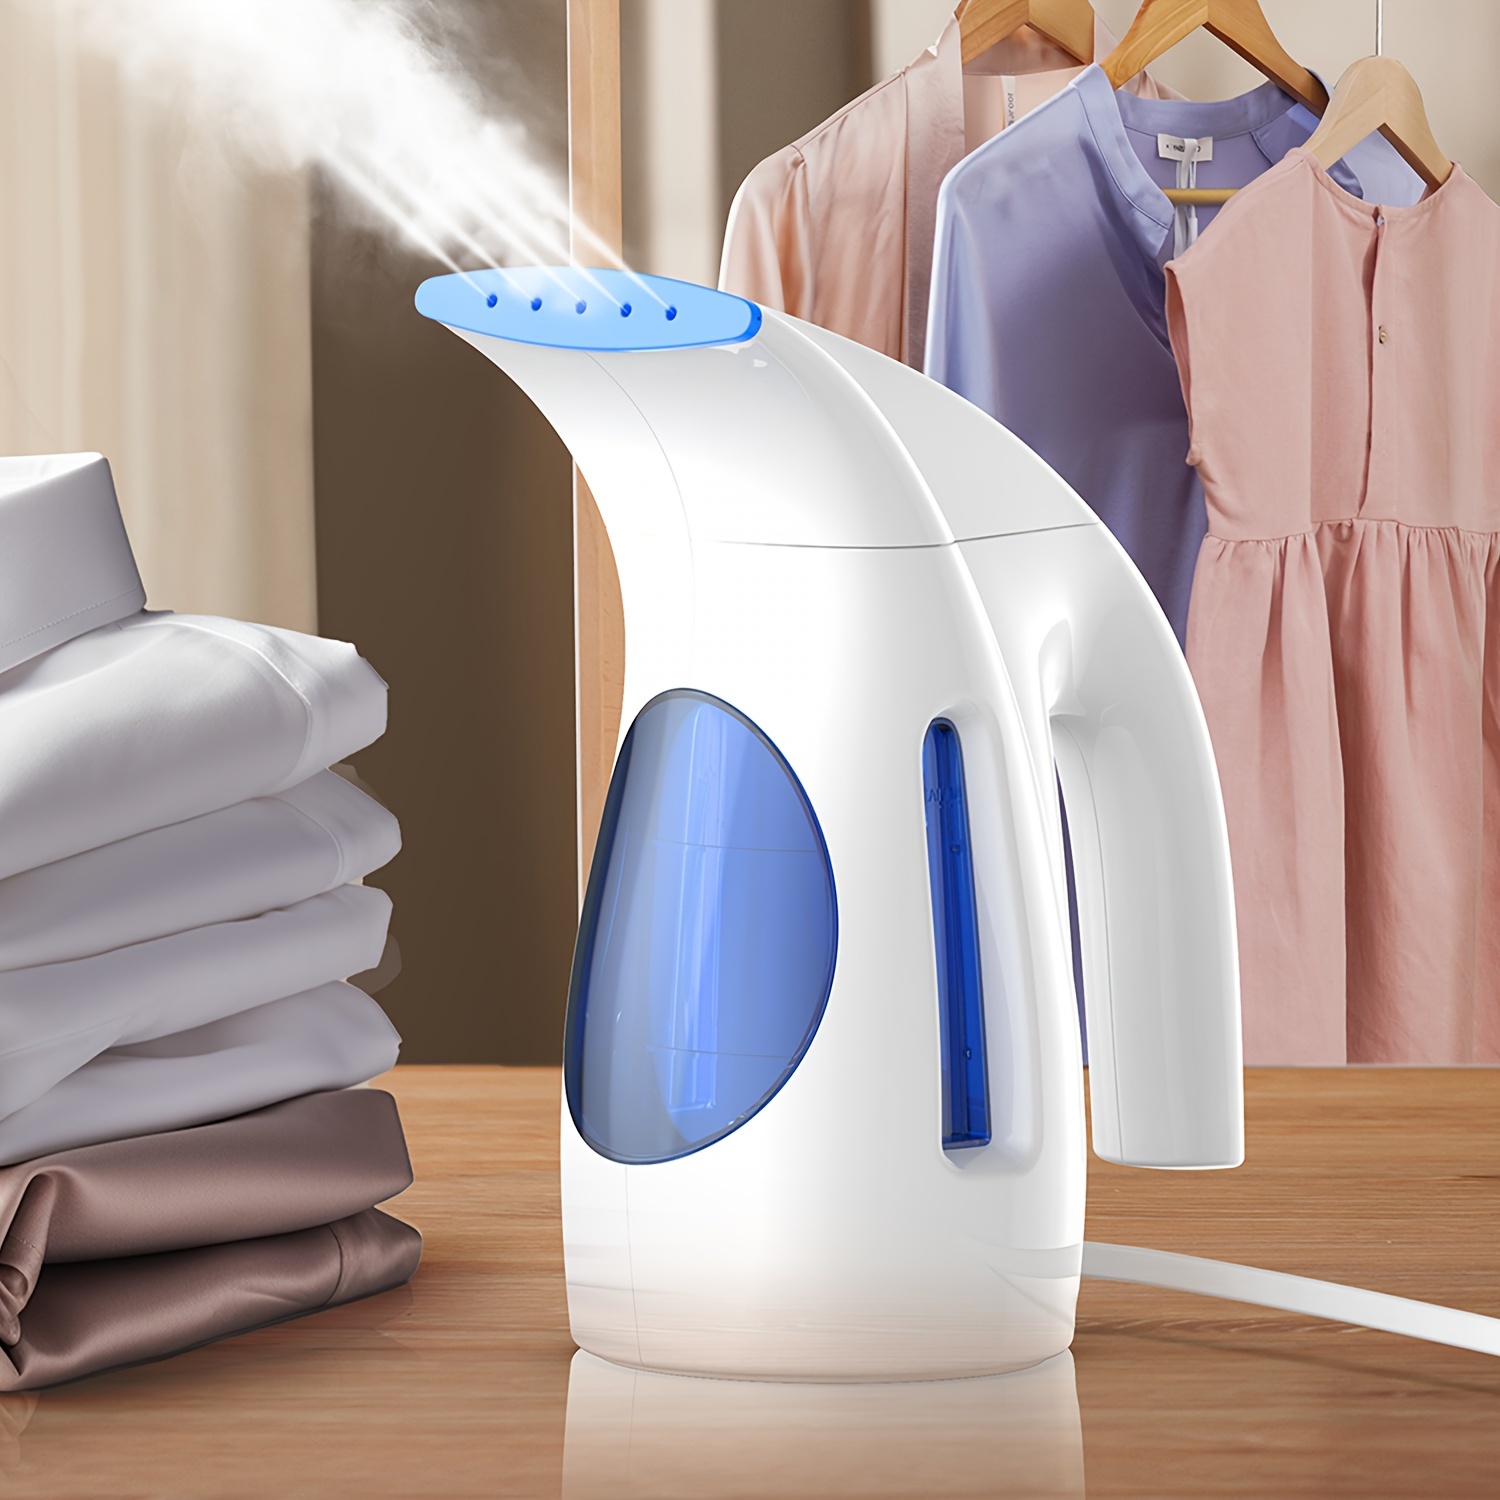 

Hilife Steamer For Clothes, Portable Handheld Design, 240ml Big Capacity, 700w, Strong Penetrating Steam, Removes Wrinkle, For Home, Office And Travel